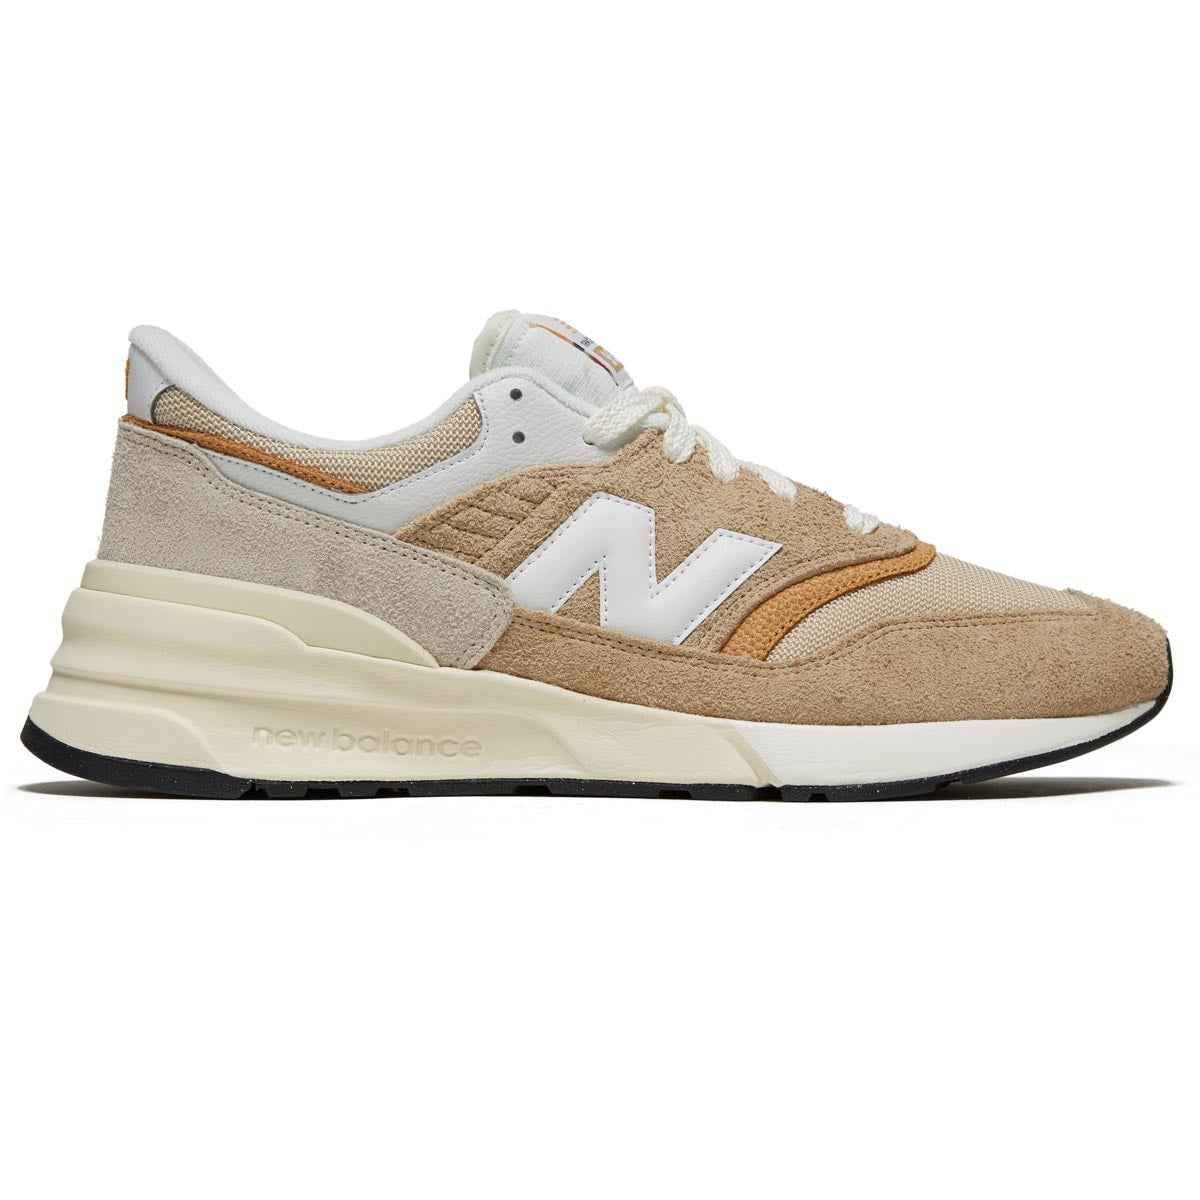 New Balance 997R Shoes - Dolce image 1